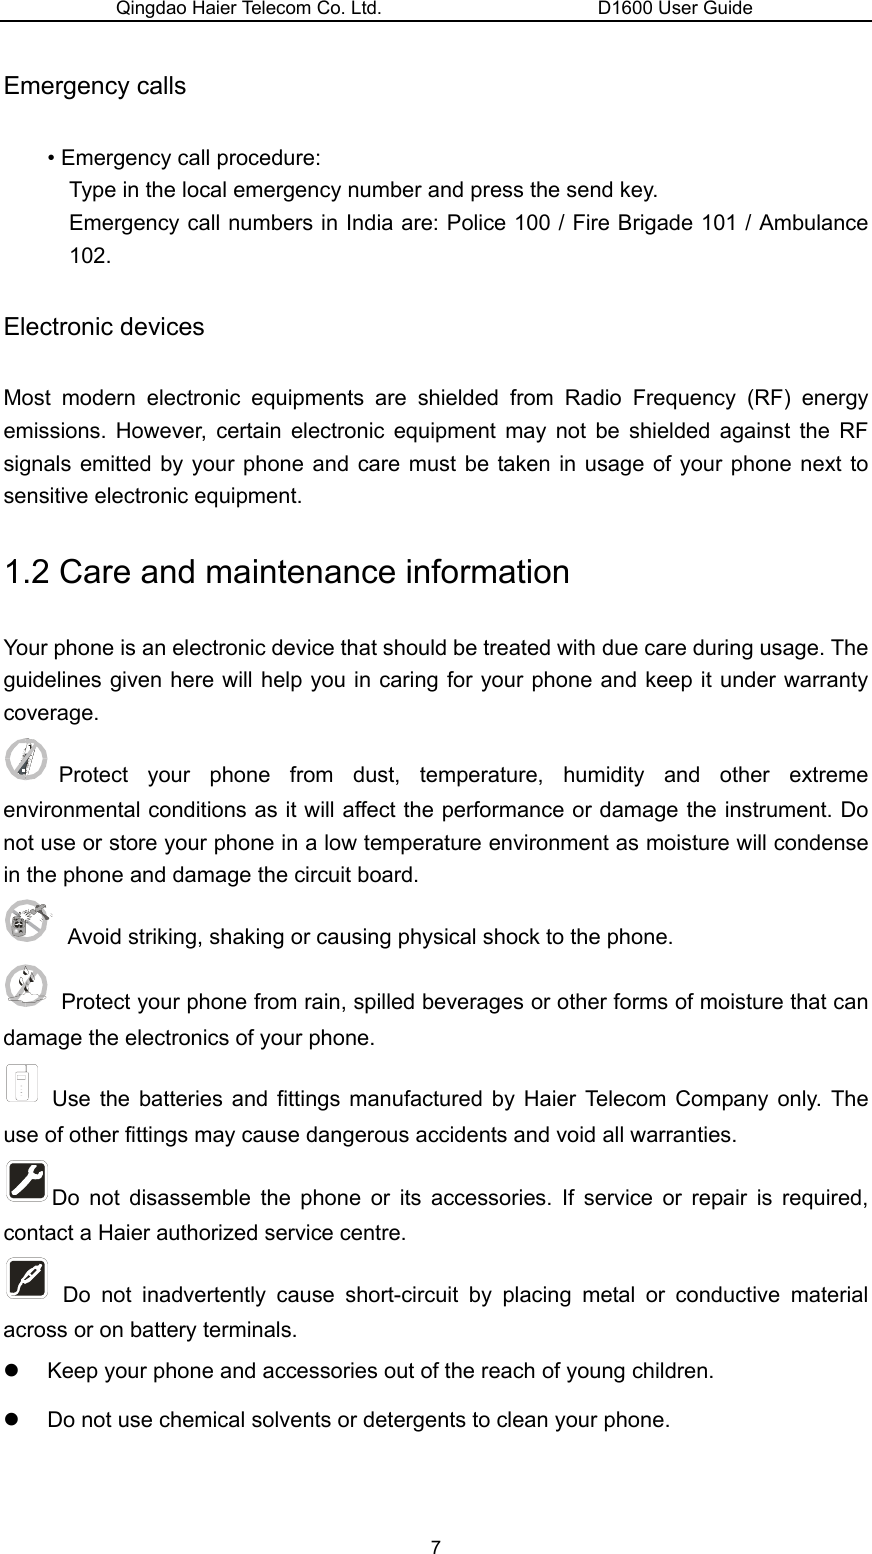 Qingdao Haier Telecom Co. Ltd.                       D1600 User Guide Emergency calls • Emergency call procedure: Type in the local emergency number and press the send key. Emergency call numbers in India are: Police 100 / Fire Brigade 101 / Ambulance 102. Electronic devices Most modern electronic equipments are shielded from Radio Frequency (RF) energy emissions. However, certain electronic equipment may not be shielded against the RF signals emitted by your phone and care must be taken in usage of your phone next to sensitive electronic equipment. 1.2 Care and maintenance information   Your phone is an electronic device that should be treated with due care during usage. The guidelines given here will help you in caring for your phone and keep it under warranty coverage. Protect your phone from dust, temperature, humidity and other extreme environmental conditions as it will affect the performance or damage the instrument. Do not use or store your phone in a low temperature environment as moisture will condense in the phone and damage the circuit board.   Avoid striking, shaking or causing physical shock to the phone.     Protect your phone from rain, spilled beverages or other forms of moisture that can damage the electronics of your phone.  Use the batteries and fittings manufactured by Haier Telecom Company only. The use of other fittings may cause dangerous accidents and void all warranties. Do not disassemble the phone or its accessories. If service or repair is required, contact a Haier authorized service centre.    Do not inadvertently cause short-circuit by placing metal or conductive material across or on battery terminals. z  Keep your phone and accessories out of the reach of young children. z  Do not use chemical solvents or detergents to clean your phone.   7 